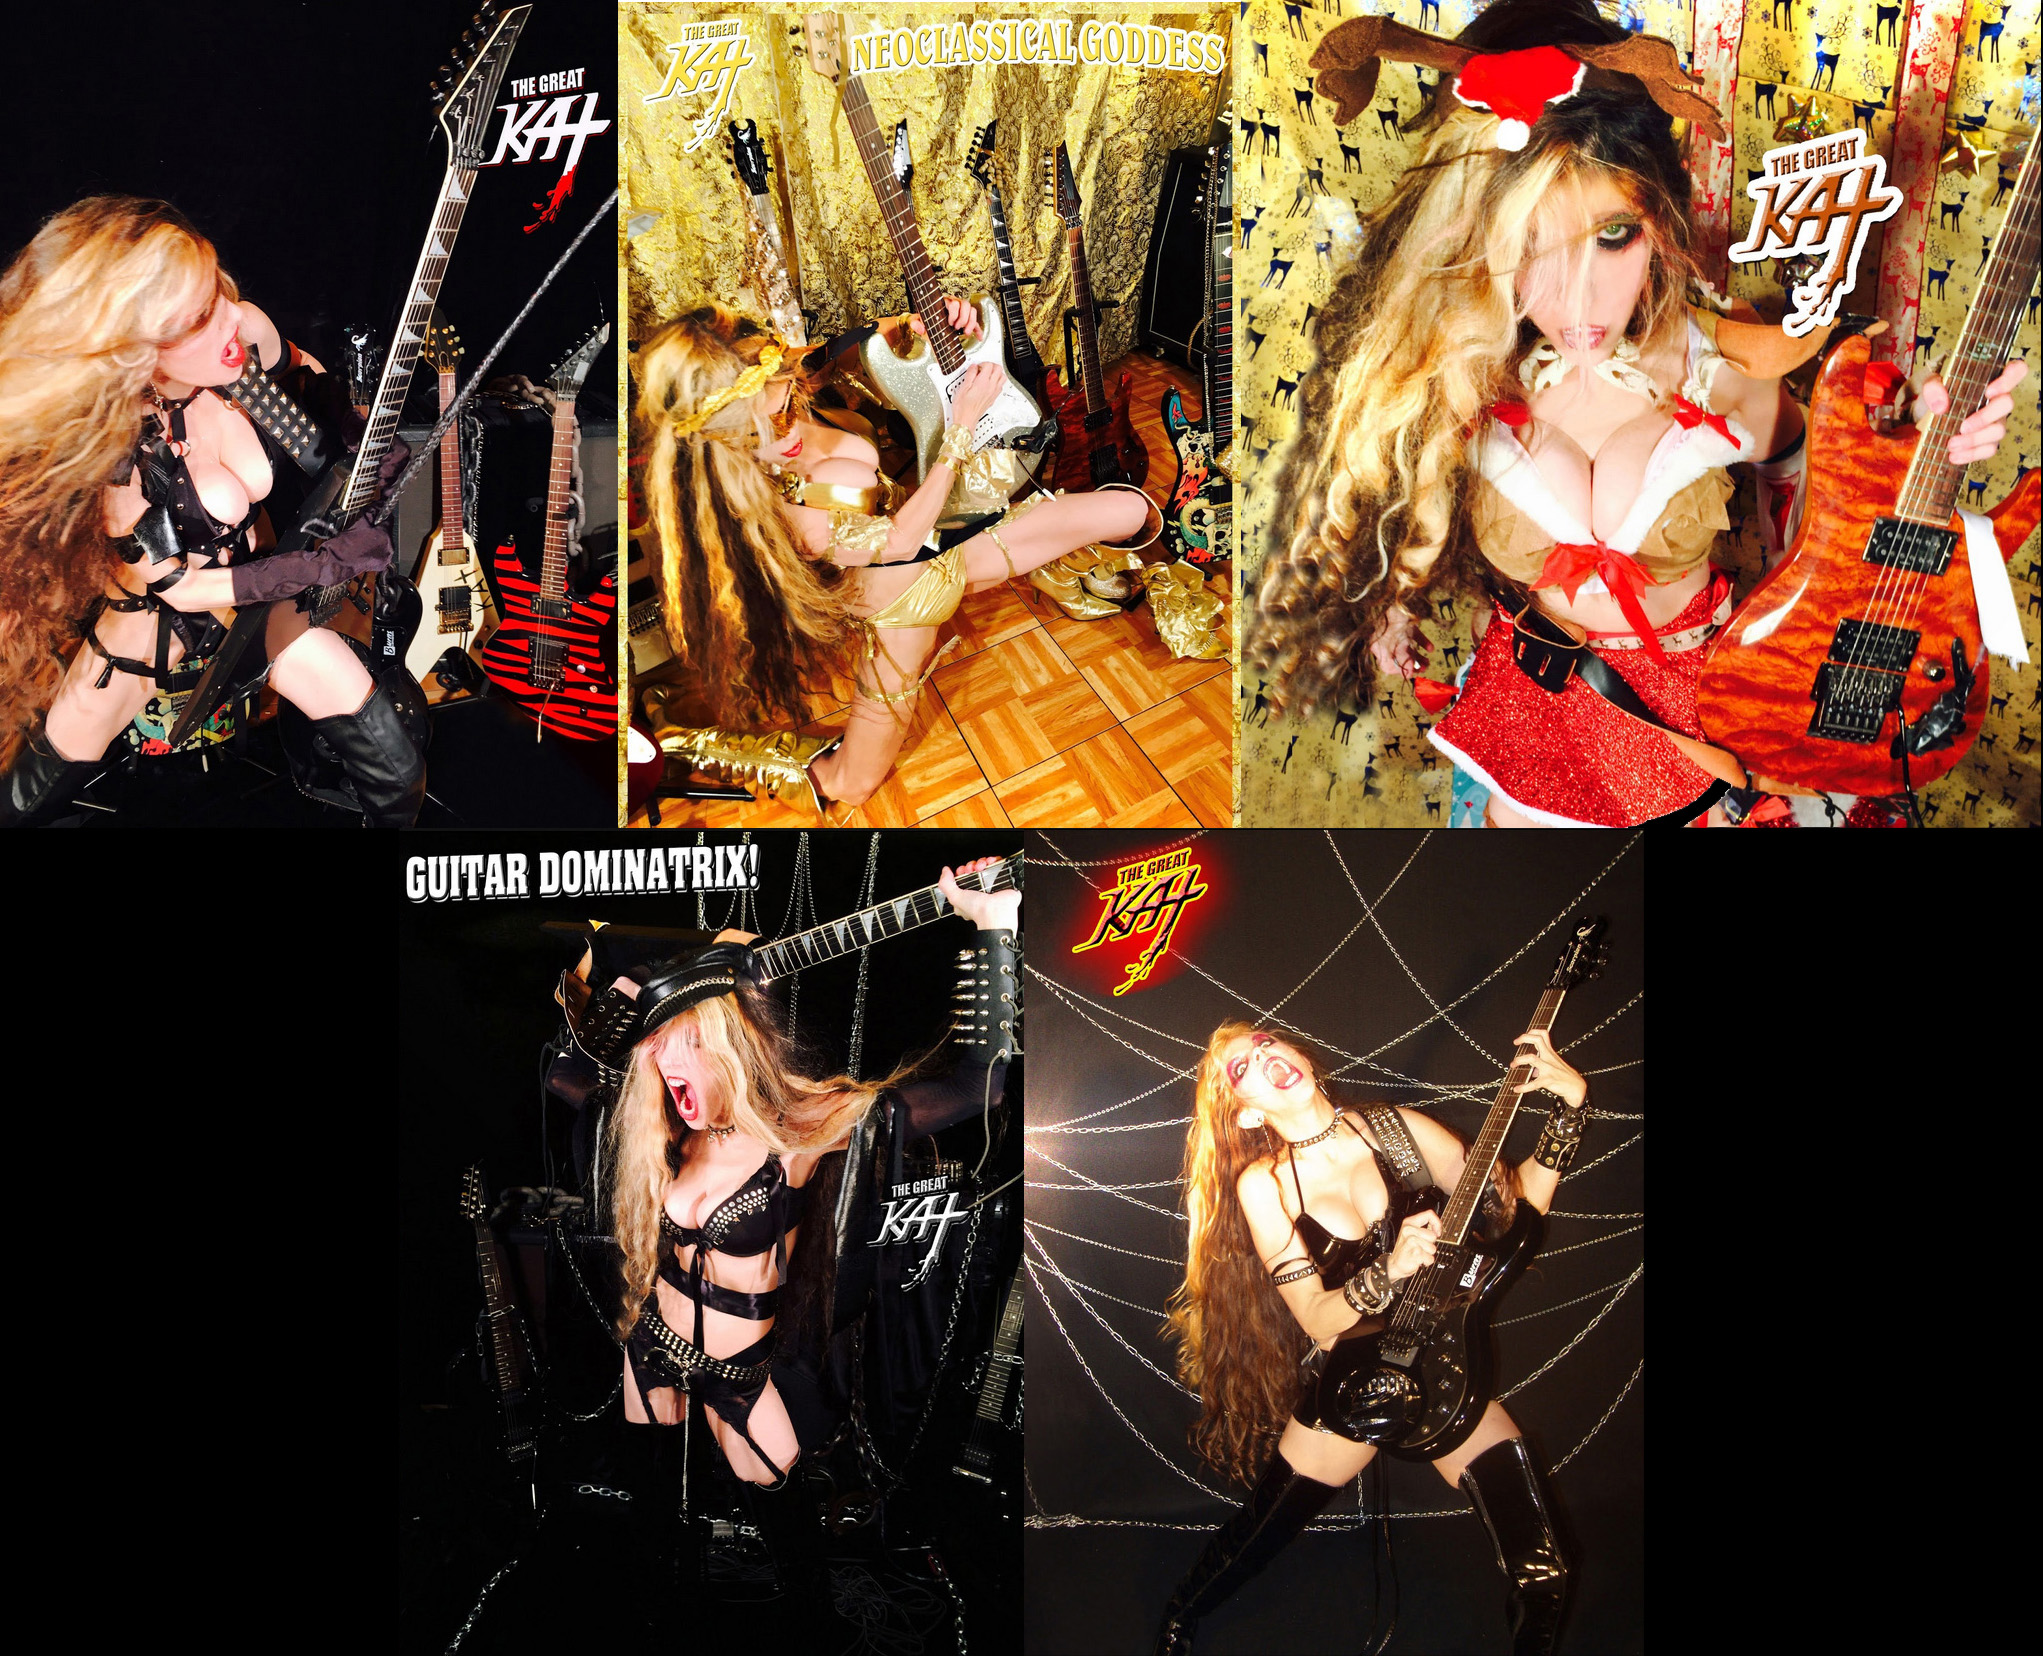 NEW! CRY OF THE WOLF METAL BLOG'S INTERVIEW WITH THE GREAT KAT! "The Great Kat Interview!!!!!!!!!!!" "She is A sonic, sorceress of the shred guitar. A universally acclaimed leader in over the top superior guitar genius. She is loud, she is proud, she is ...THE GREAT KAT!!!!! Hail to the Great Kat." - by Bryan Martin, Cry Of The Wolf Metal Blog